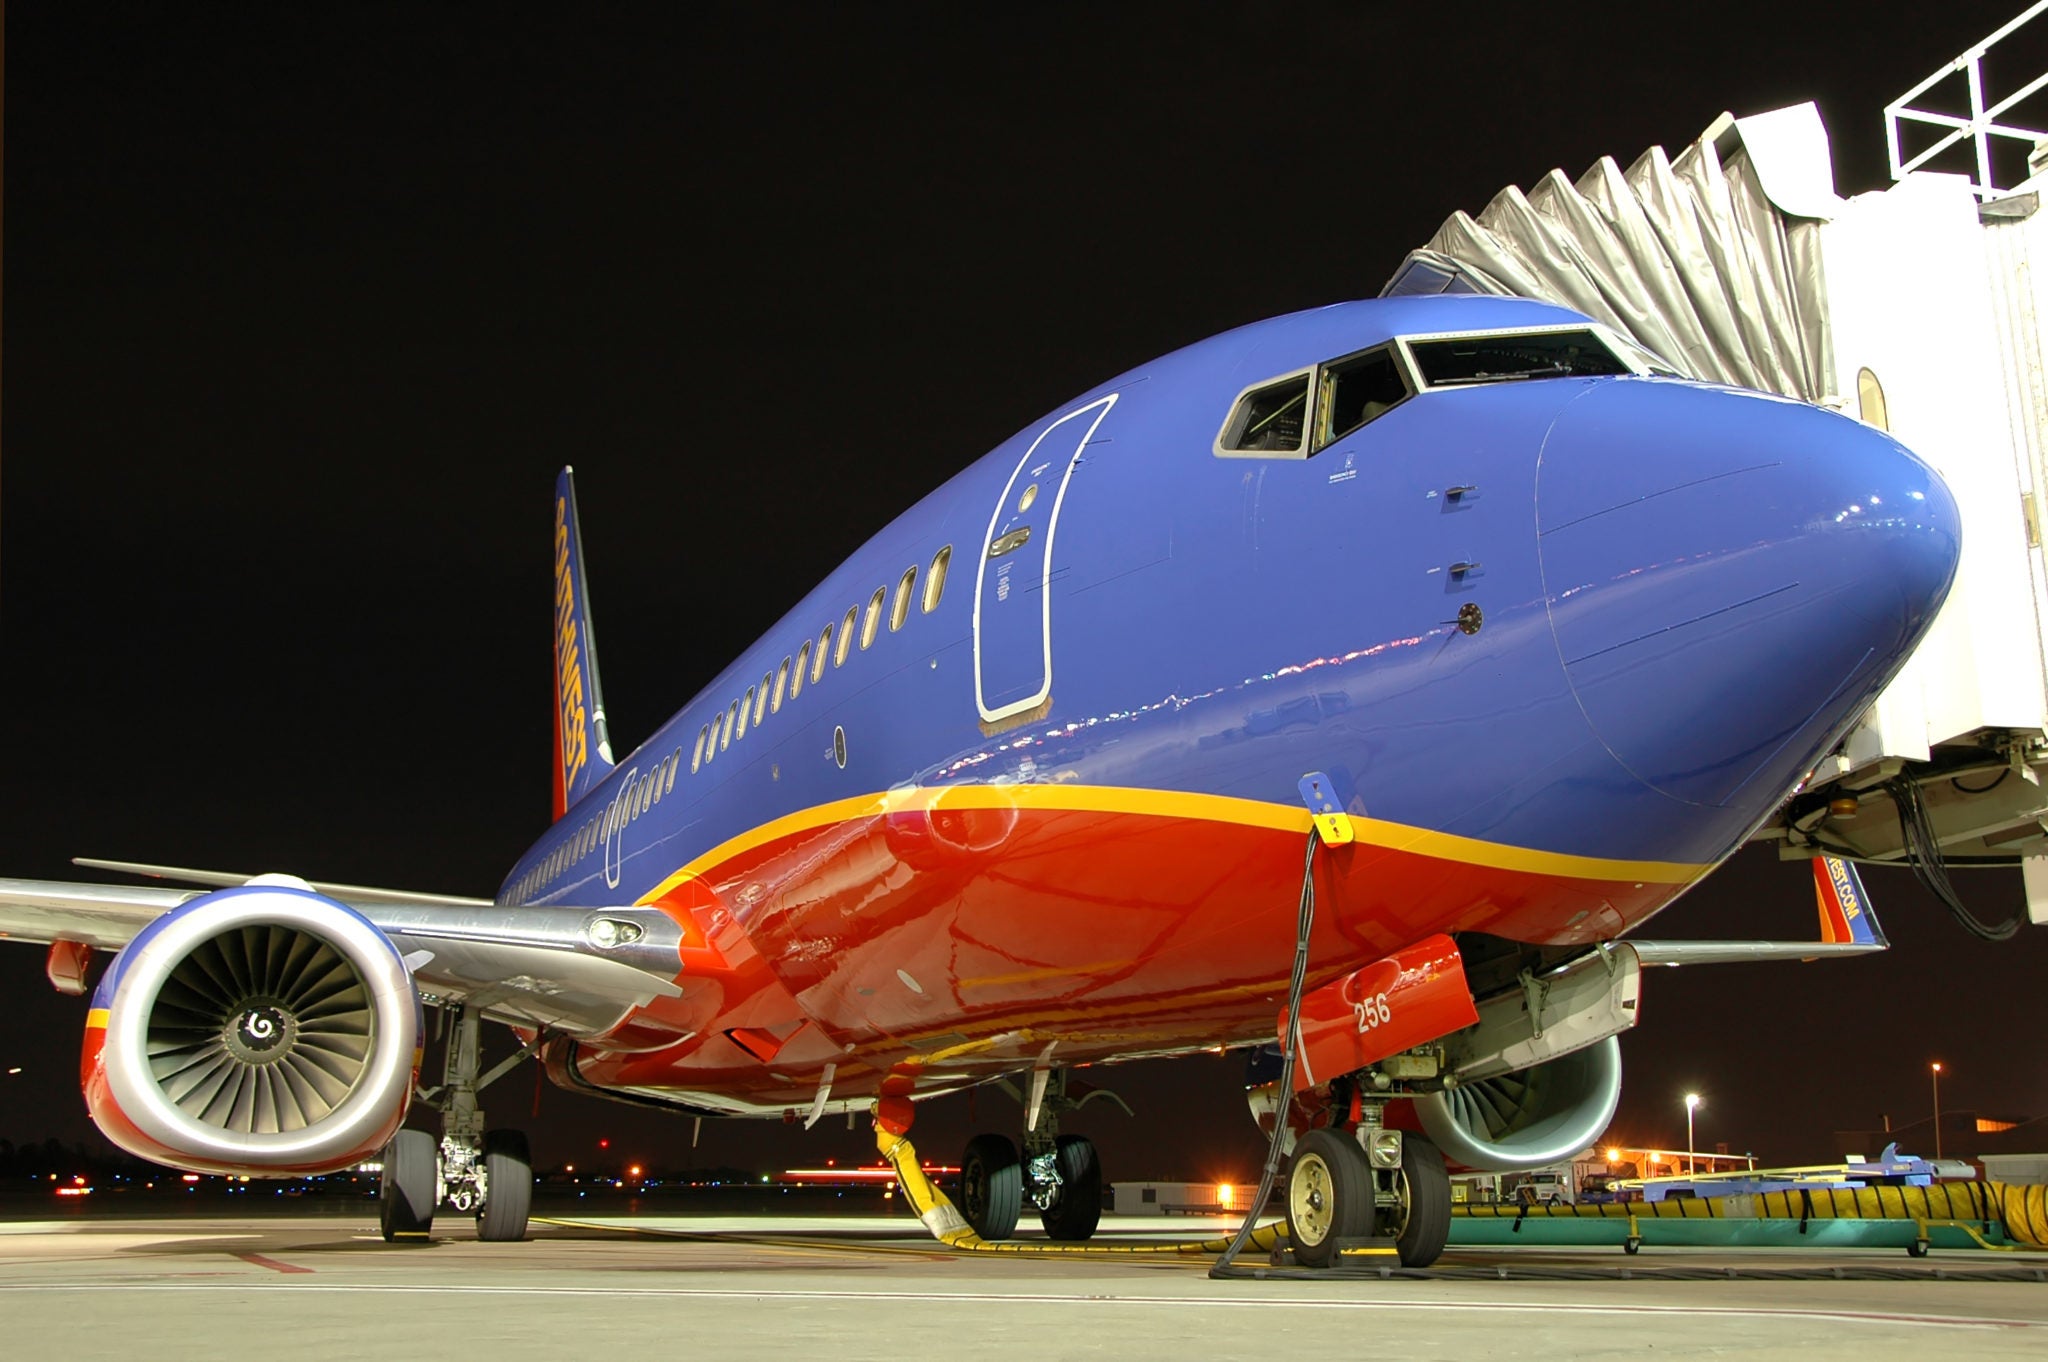 working for southwest airlines reviews